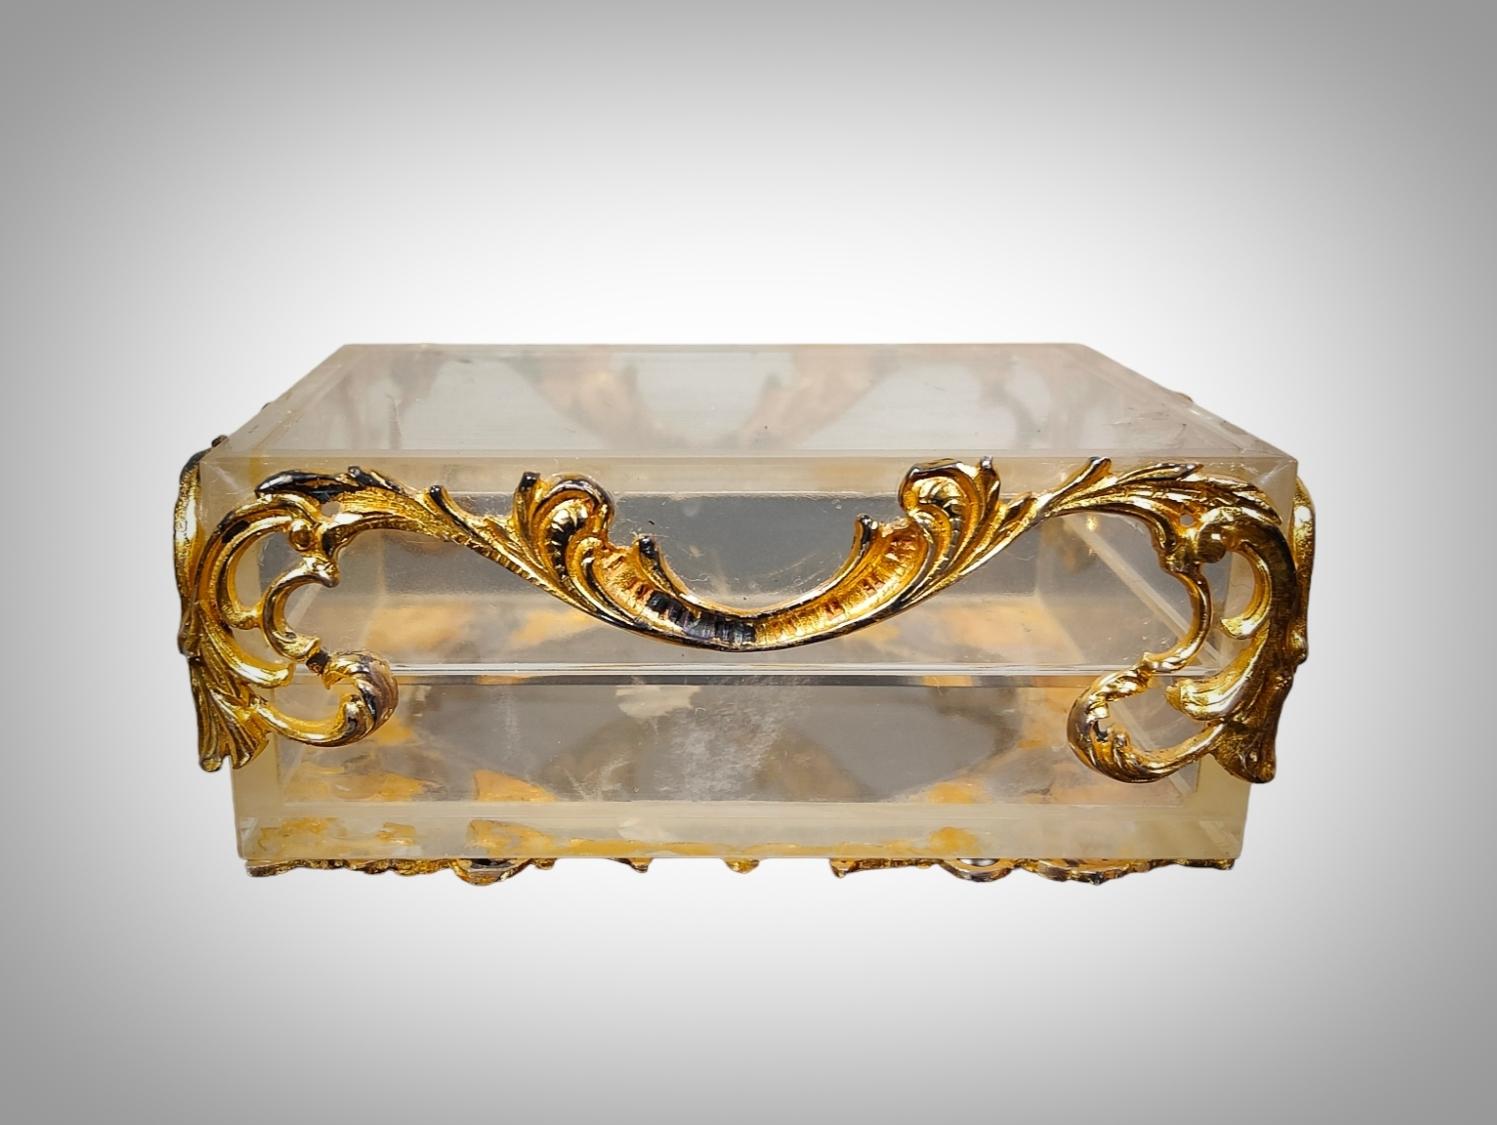 Small Box In Rock Crystal And Bronze XIX
Austrian box from the end of the 19th century in quartz (rock crystal) and gilded bronze Good condition Measures: 6x4x2.5 cm Good condition